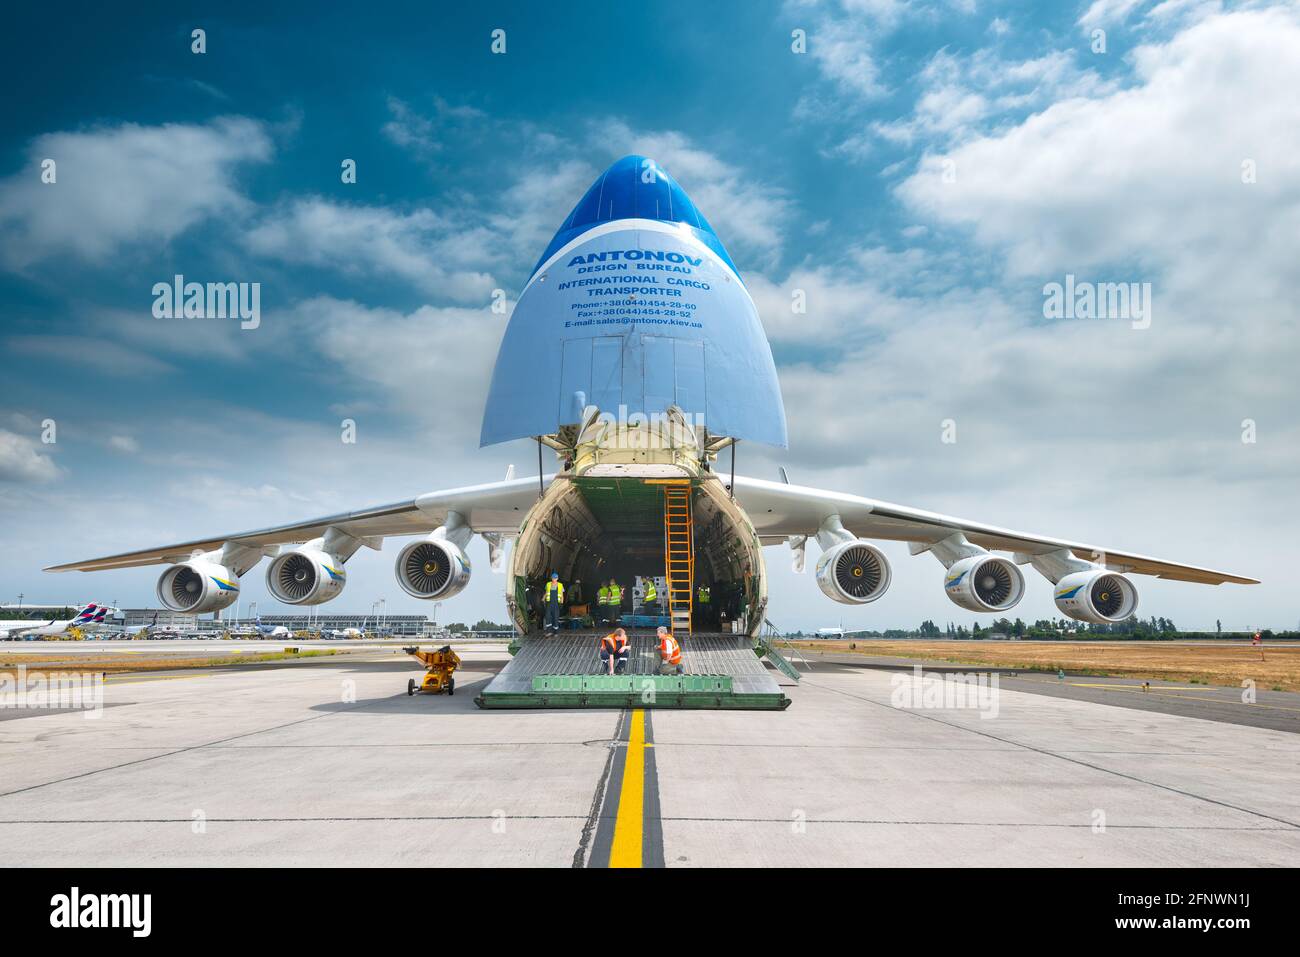 Santiago de Chile, Metropolitan Region, Chile, South America - The Antonov 225 also know as AN-225 and the biggest airplane in the Stock Photo